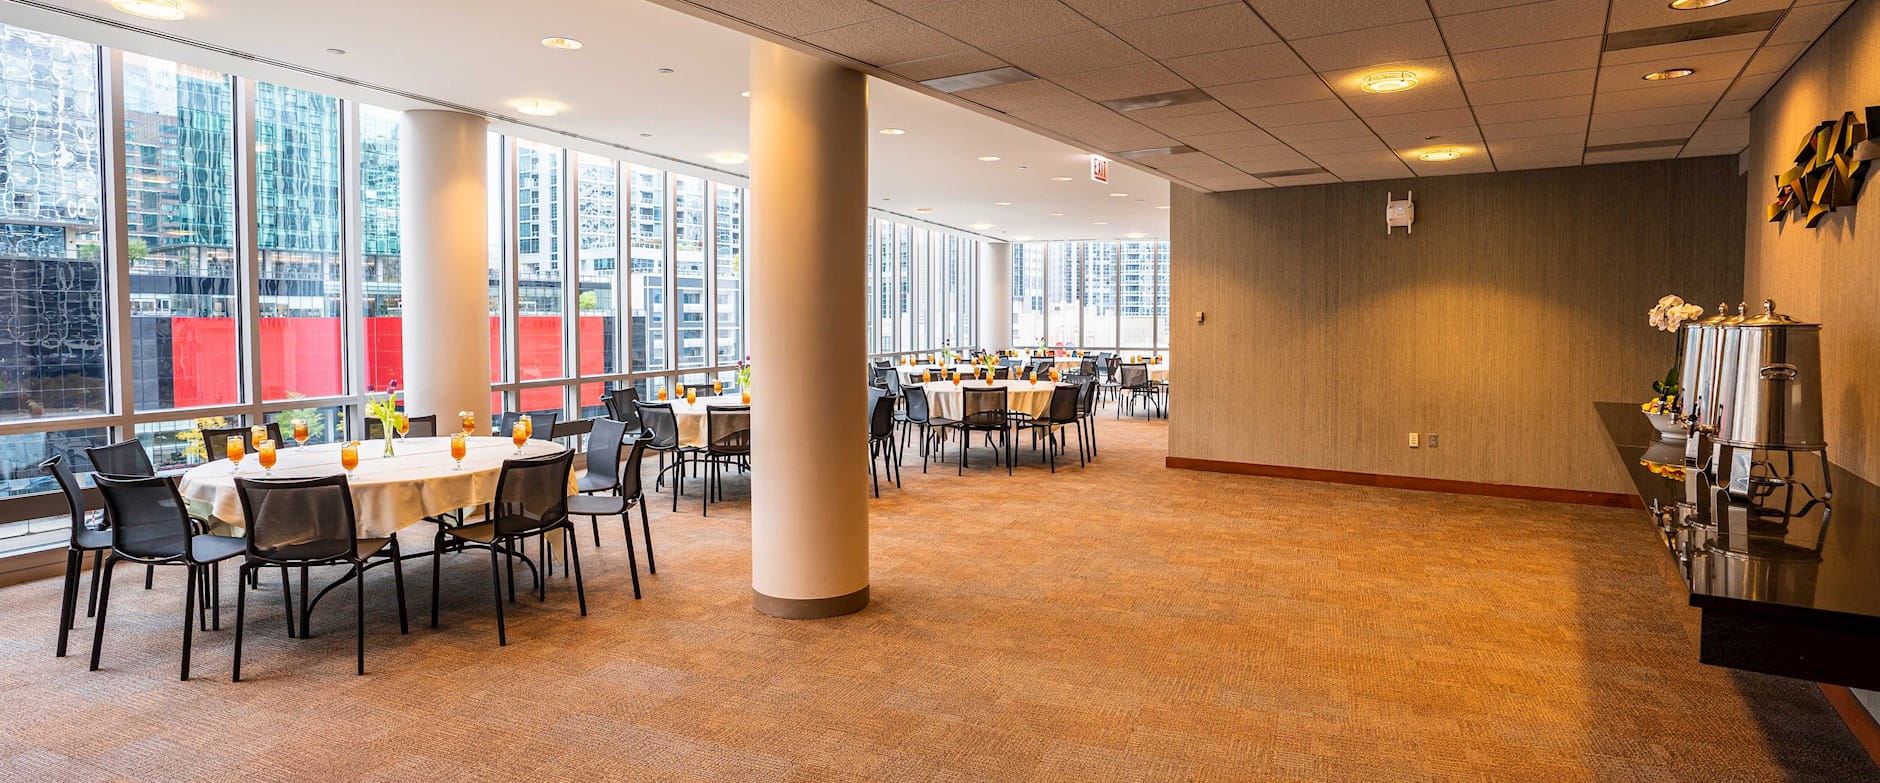 View of the Medium North Lounge at the Gleacher Center with a wide open space with tables along a window on the side